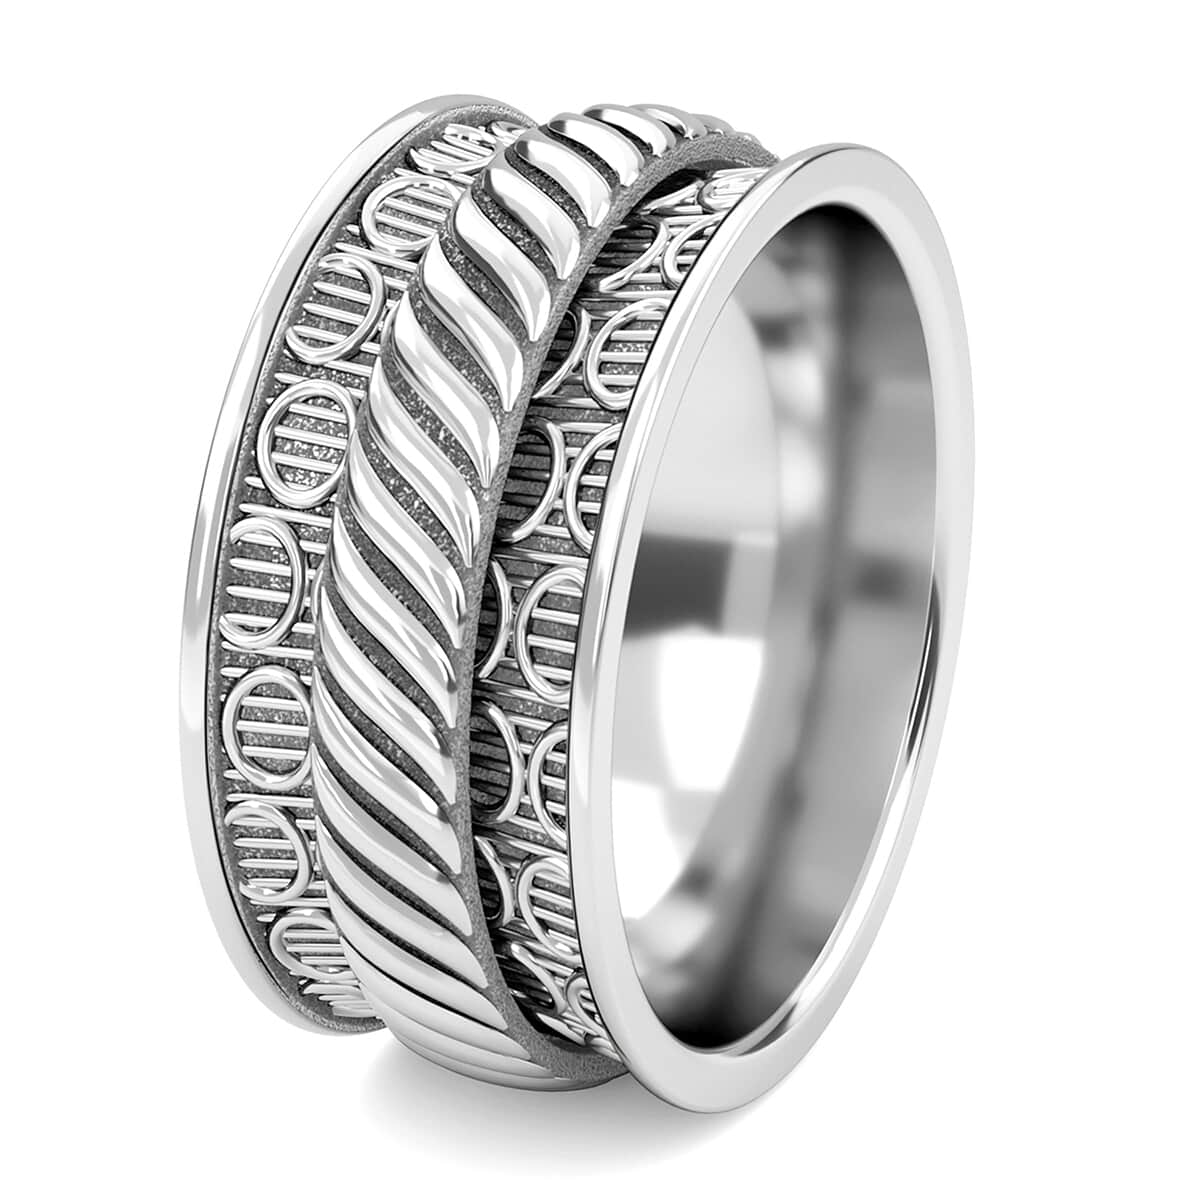 Sterling Silver Spinner Ring, Anxiety Ring for Women, Fidget Rings for Anxiety for Women, Stress Relieving Anxiety Ring (Size 11.0) (4.75 g) image number 5